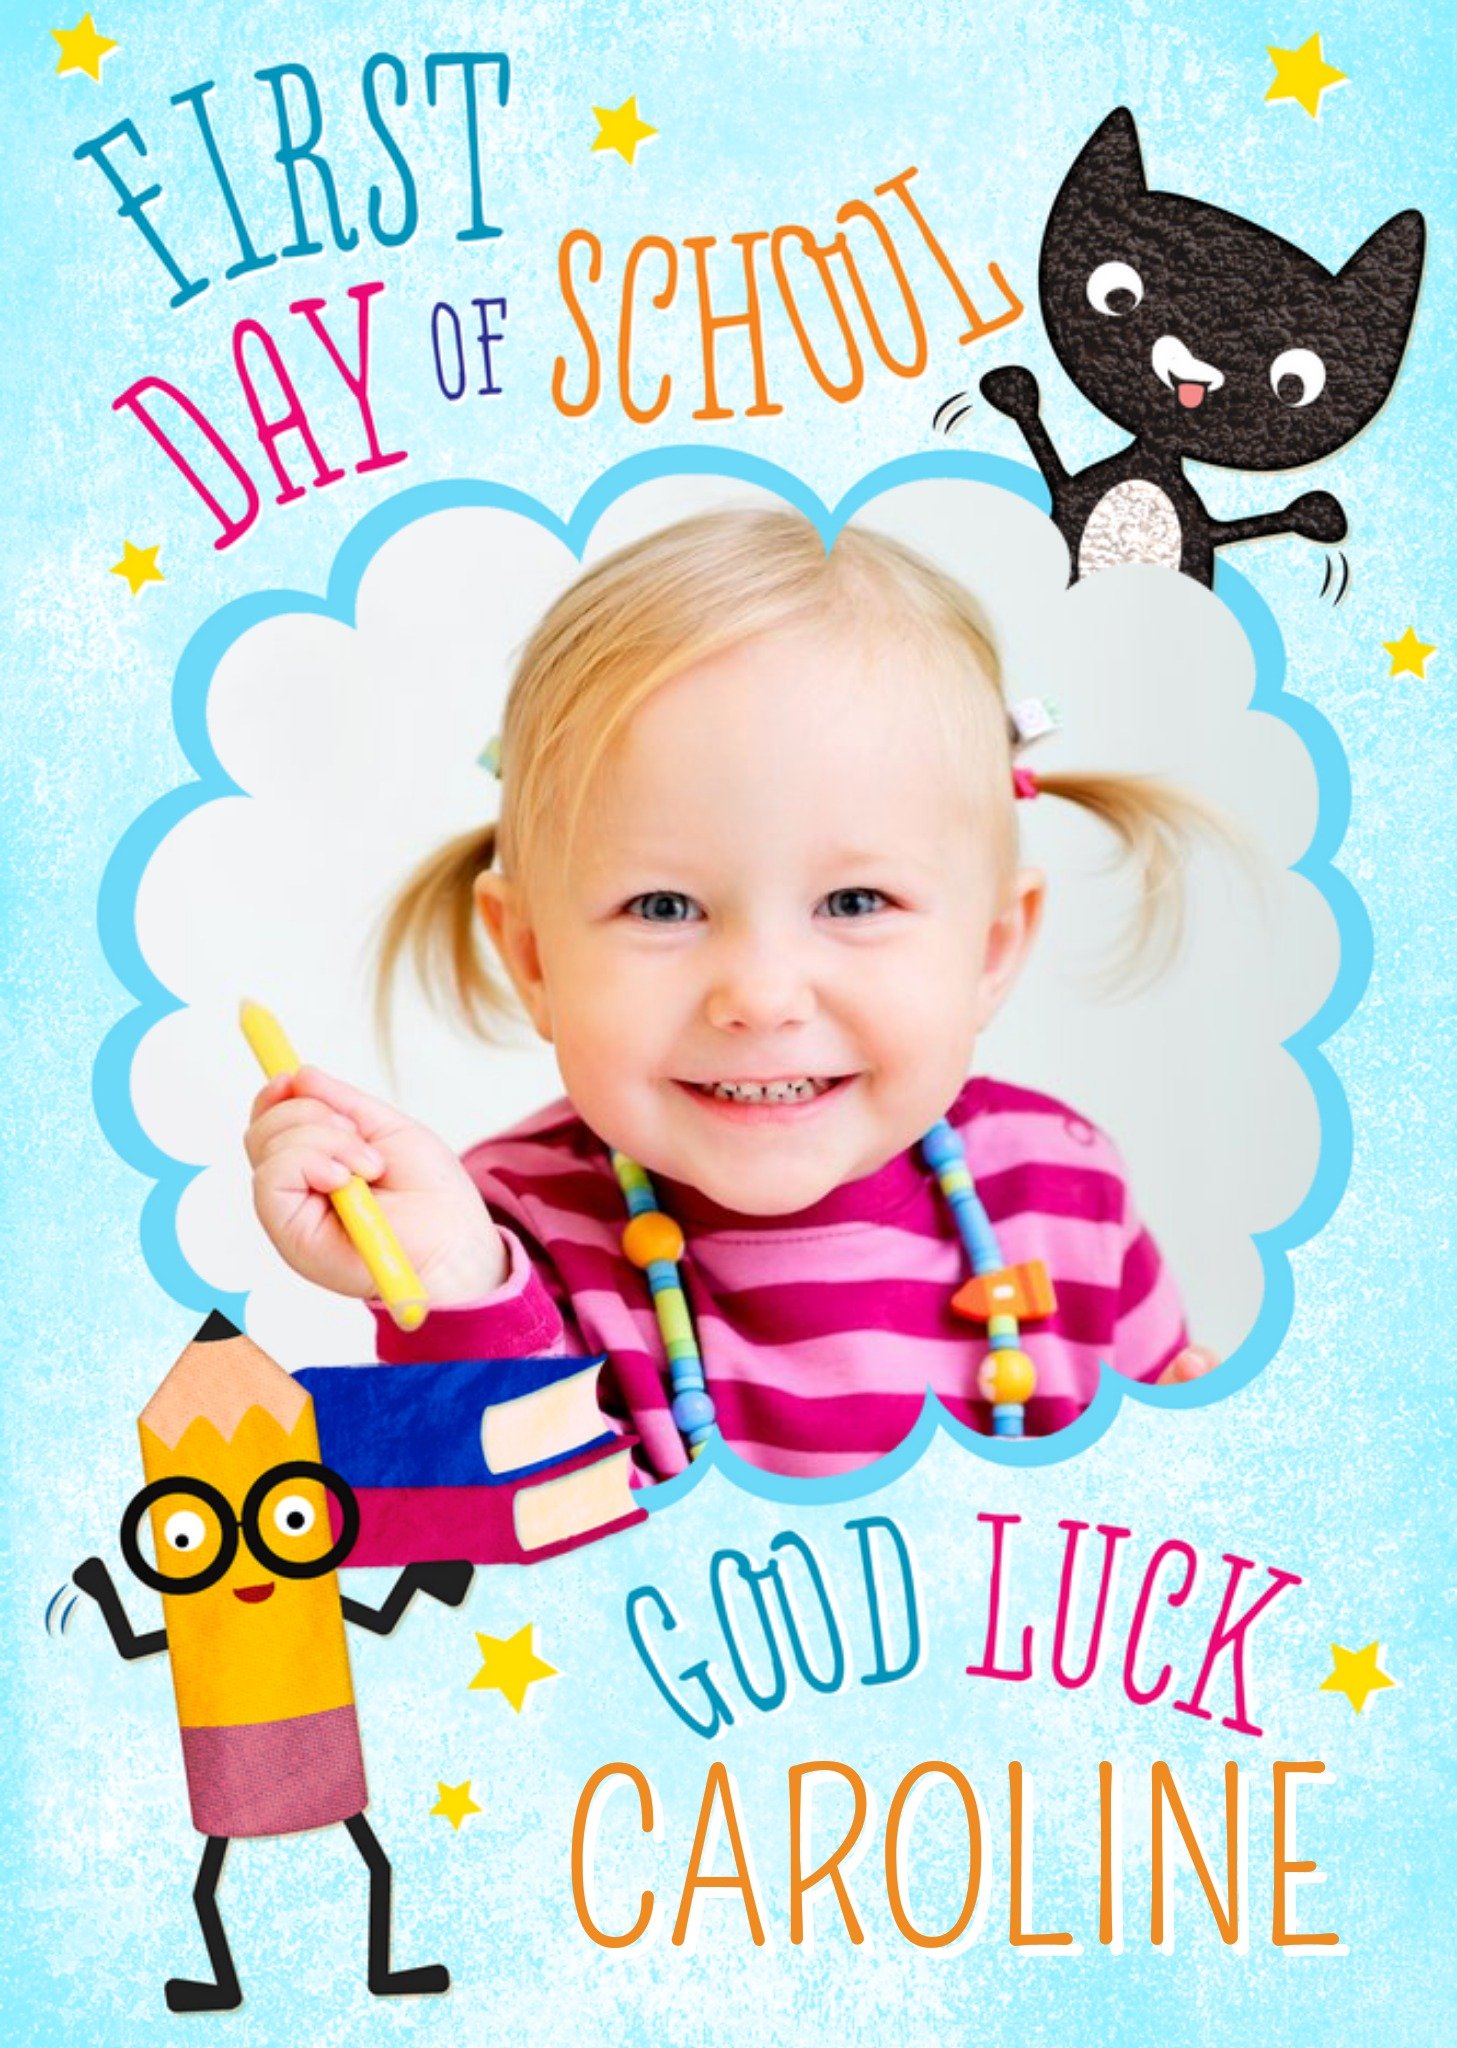 Moonpig Cat And Pencil Characters Personalised Photo Upload First Day Of School Card, Large